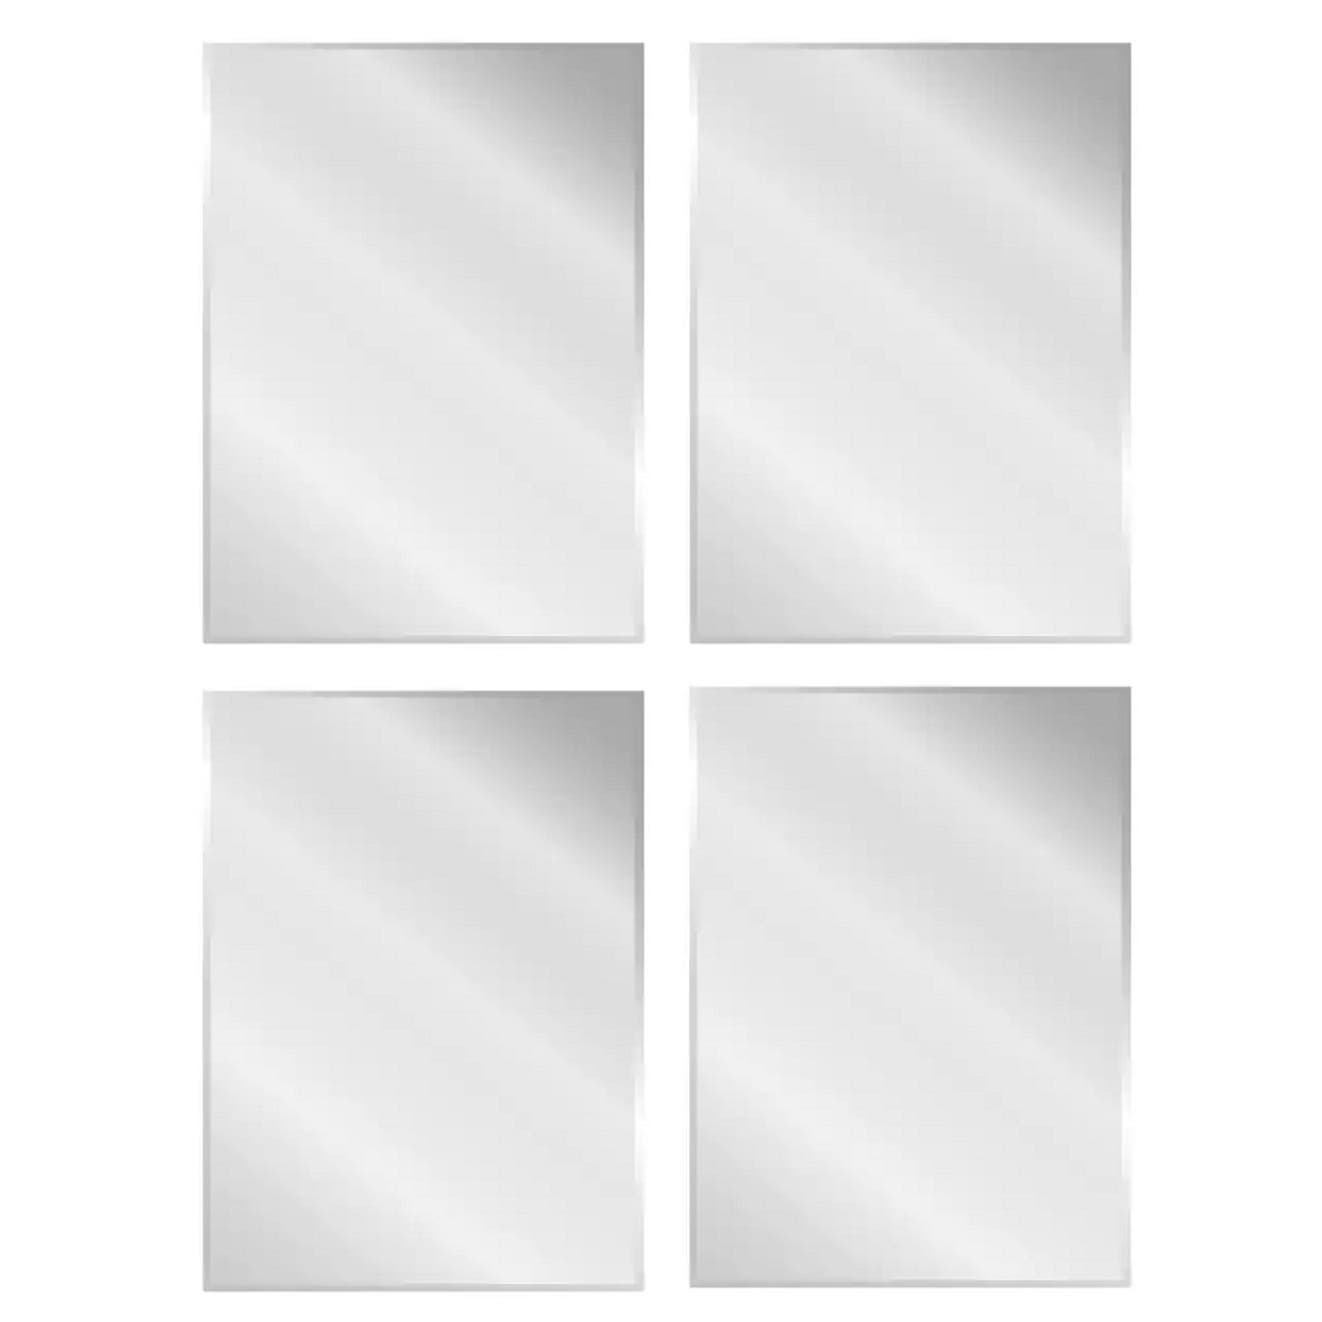 [LOCAL PICKUP 35054 Cropwell AL $30 Per case of 4 Mirrors] (4-PK) 24 in. x 30 in. Frameless Rectangular Beveled Edged Mirror (4 Mirrors) [LOCAL PICKUP 35054 Cropwell AL $30 Per case of 4 Mirrors]